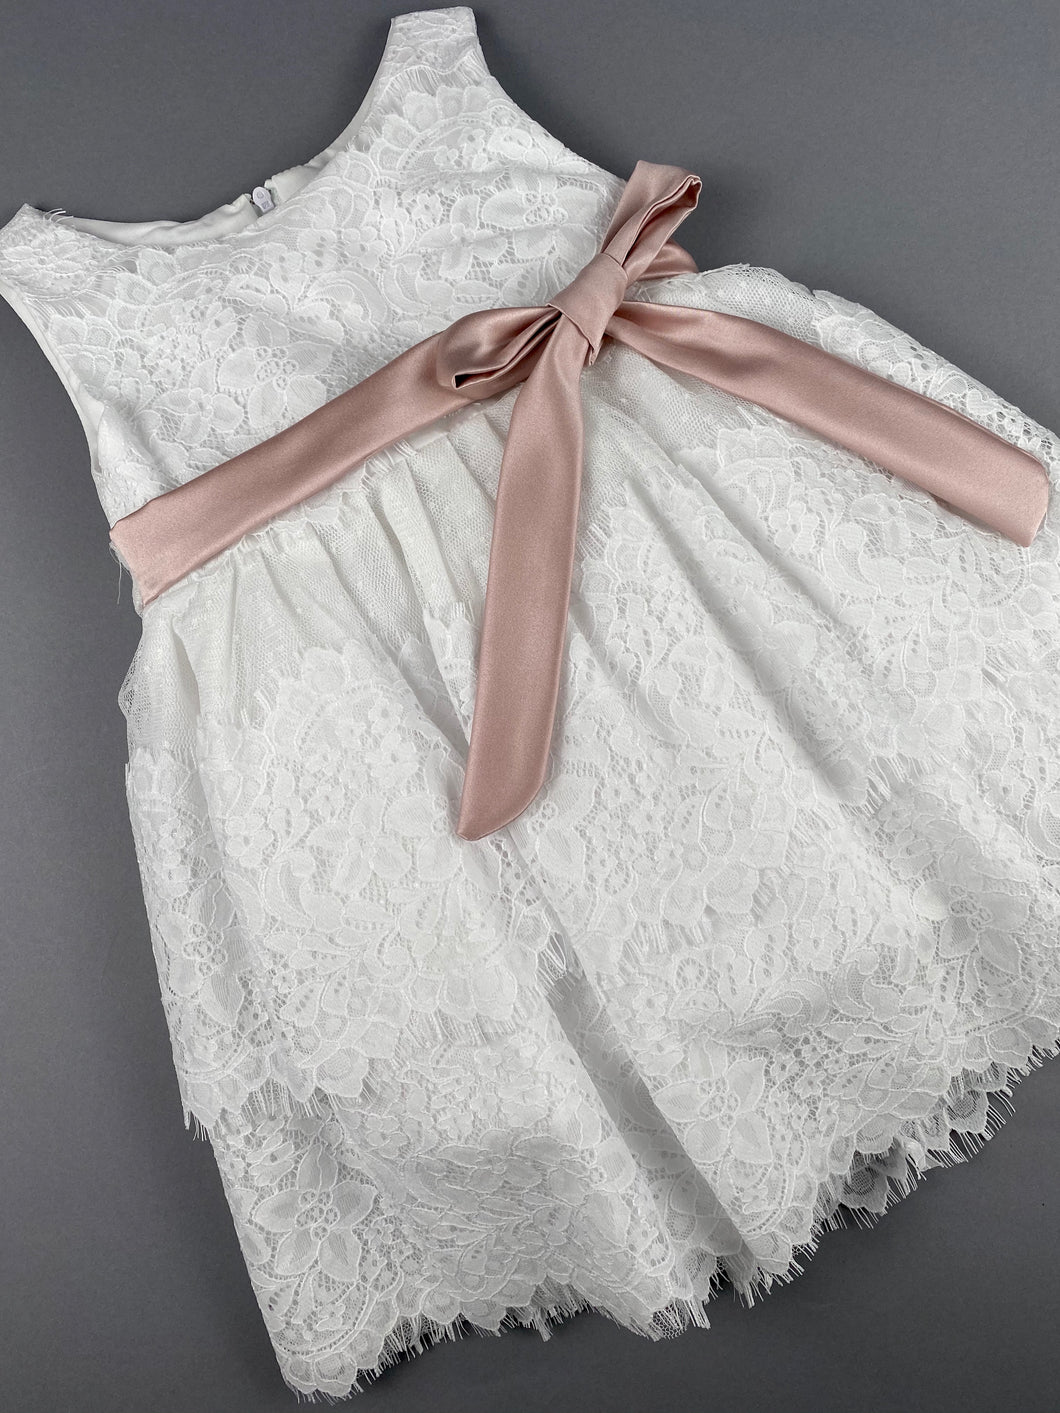 Dress 51 Girls Baptismal Christening Sleeveless 3pc  Dress , matching Bolero and Hat. Made in Greece exclusively for Rosies Collections.